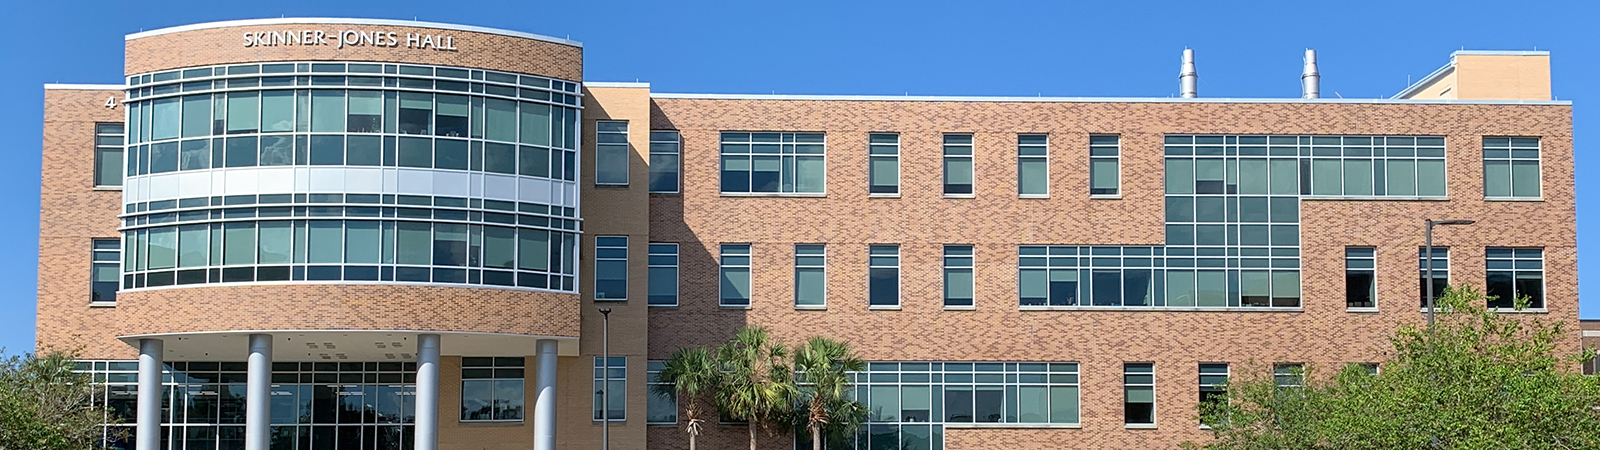 Skinner-Jones Hall on the campus at UNF